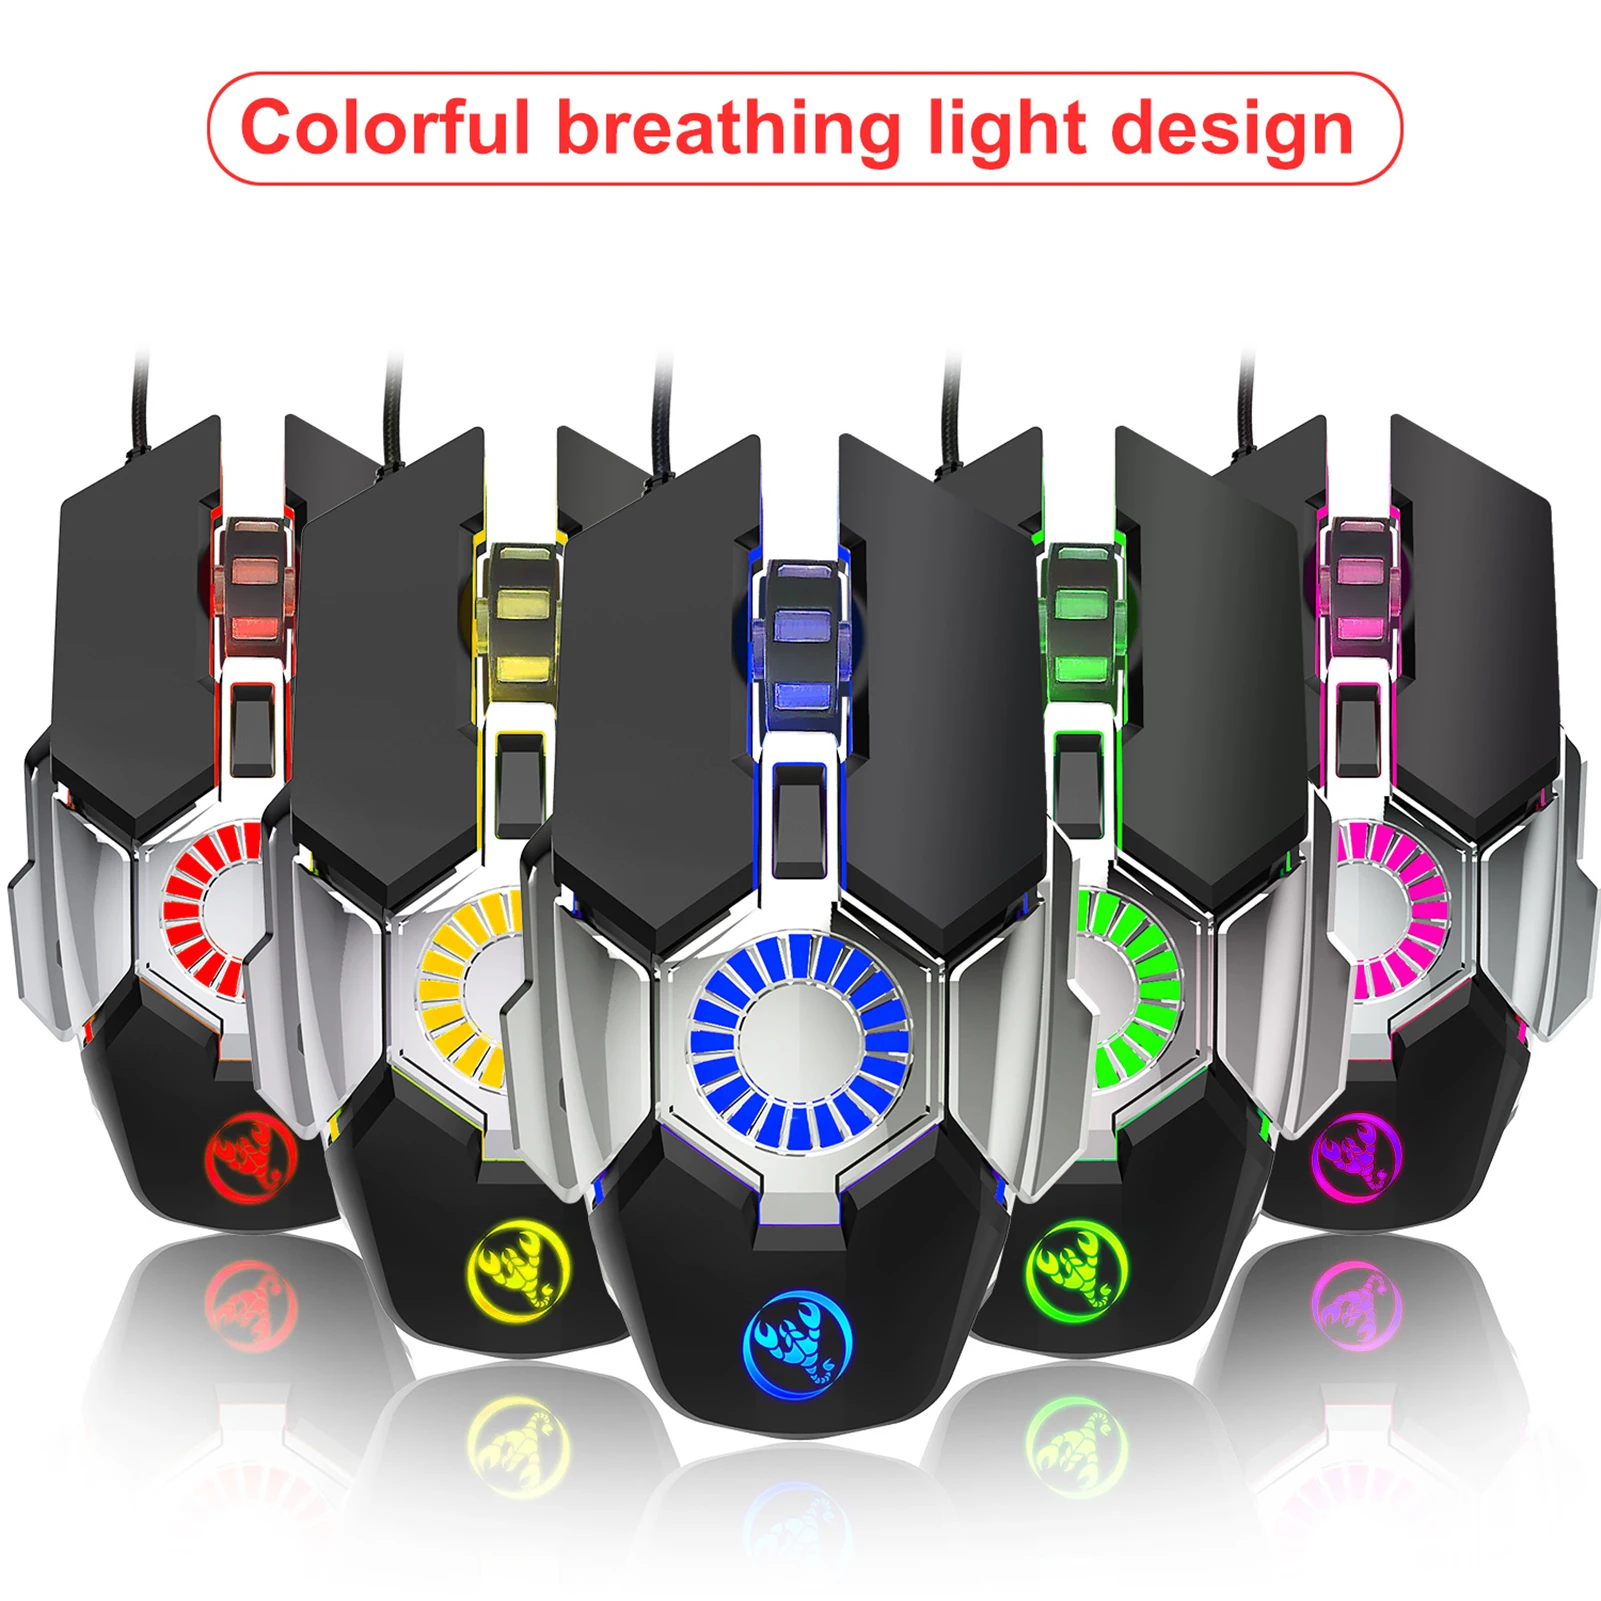 

Programmable HXSJ J700 Macro Gaming Mouse Colorful Breathing Light Gaming Mouse with Adjustable DPI for PC Notebook Laptop